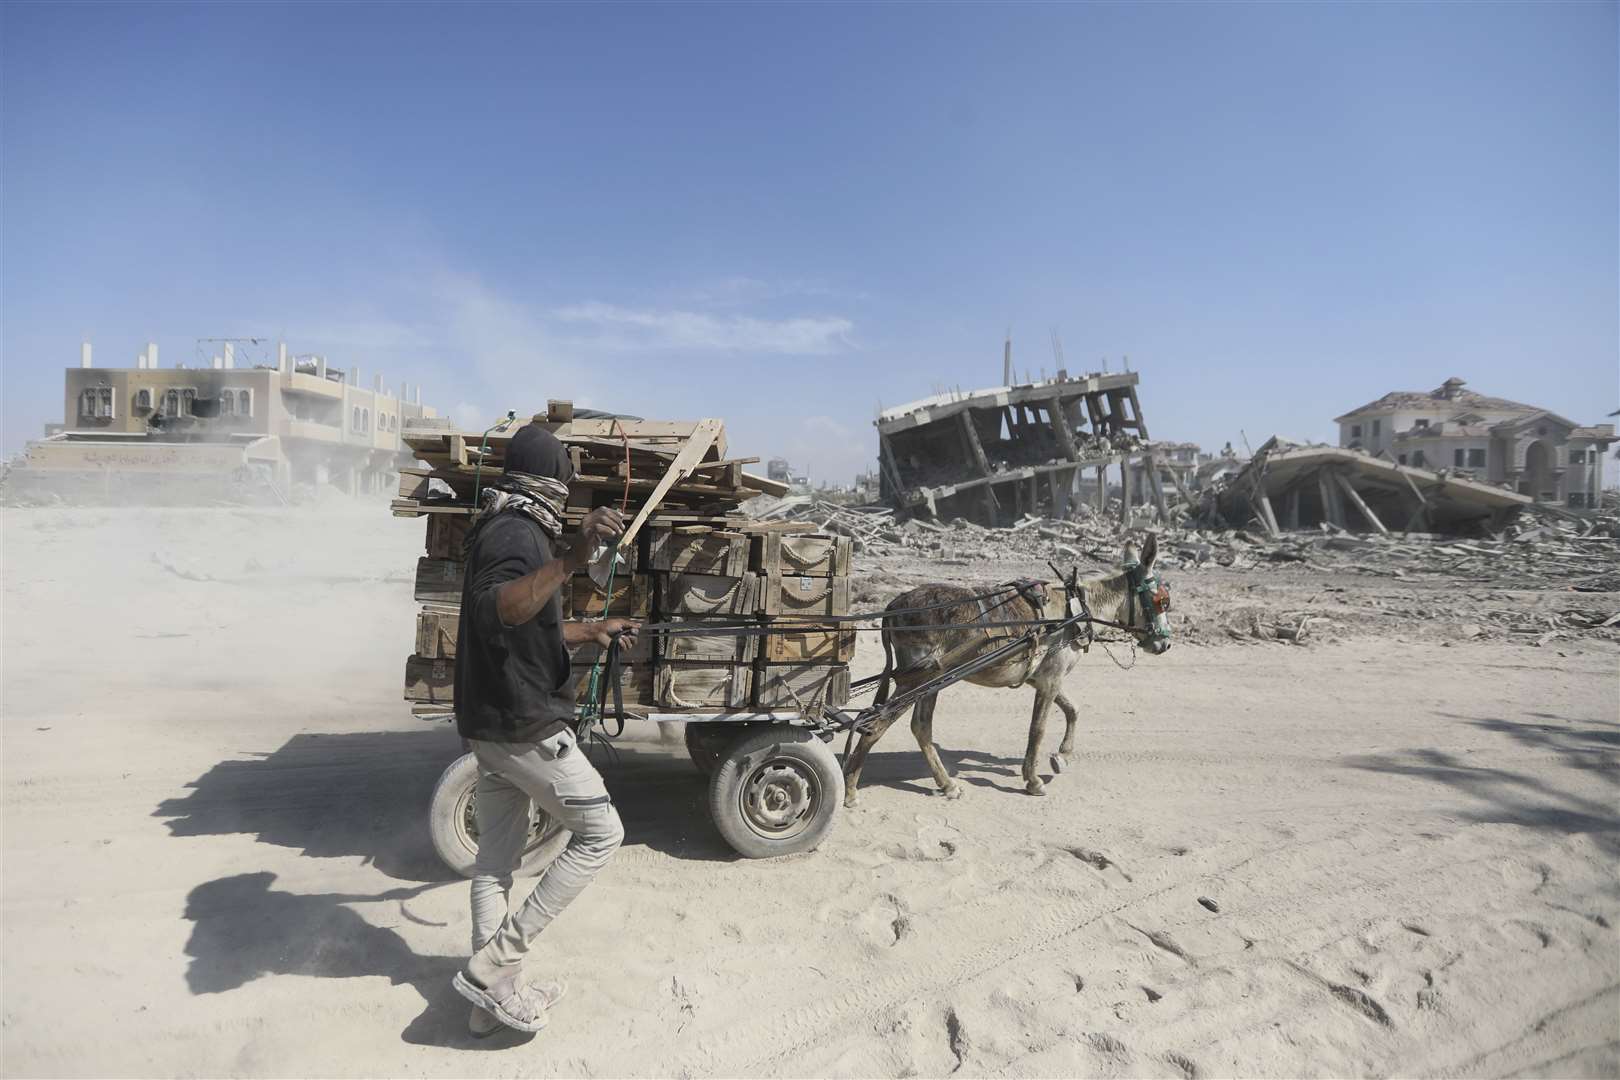 Palestinians walk through the destruction left by the Israeli air and ground offensive after they withdrew from Khan Younis in the southern Gaza Strip (Ismael Abu Dayyah/AP)